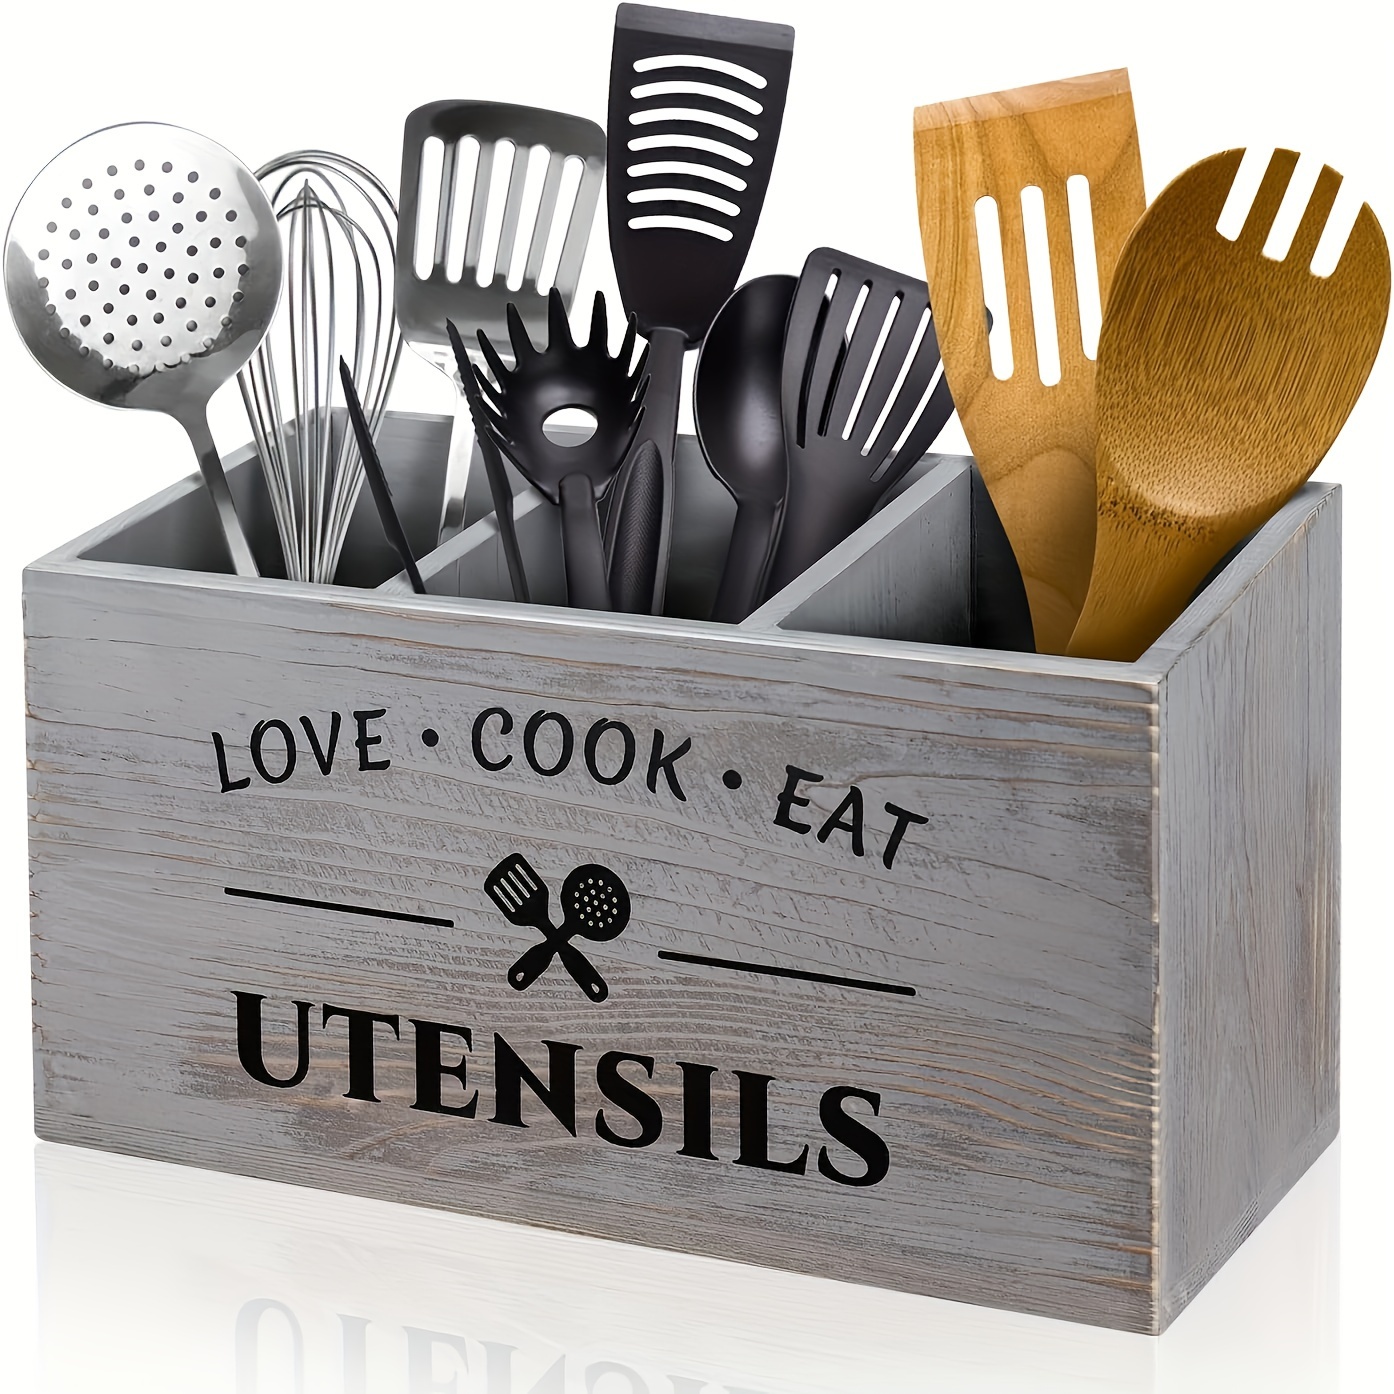 

Wooden Flatware Organizer With 3 Compartments - Rustic Utensil Caddy With "love Cook Eat" Inscription, Tension Mount, Lightweight Kitchen Storage For Home And Restaurant (1pc)